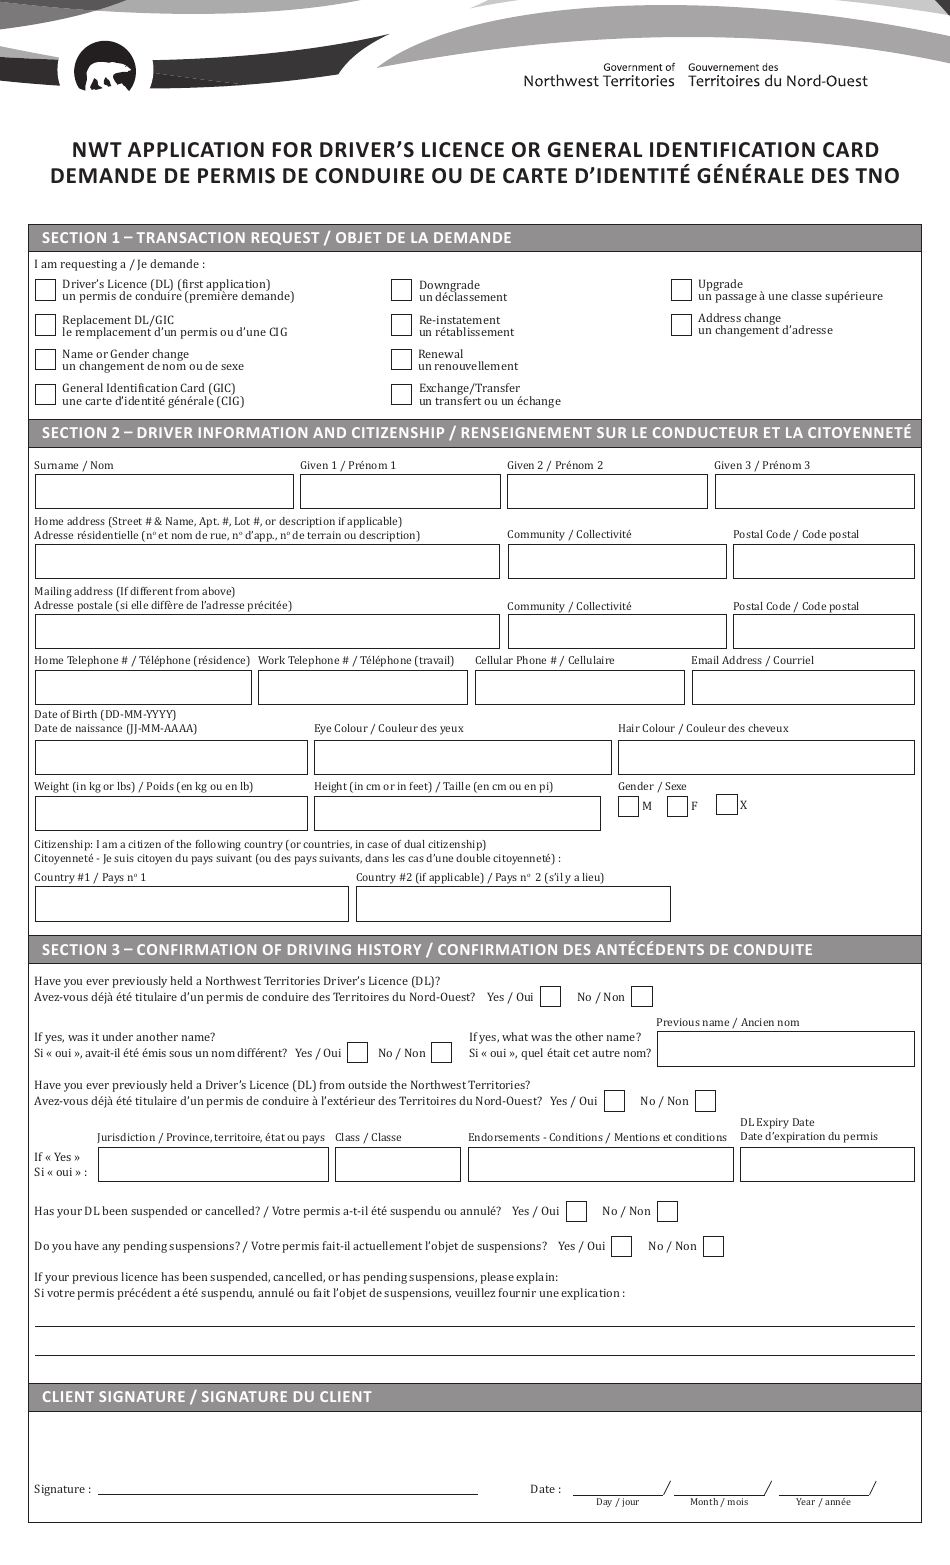 Nwt Application for Drivers Licence or General Identification Card - Northwest Territories, Canada (English / French), Page 1